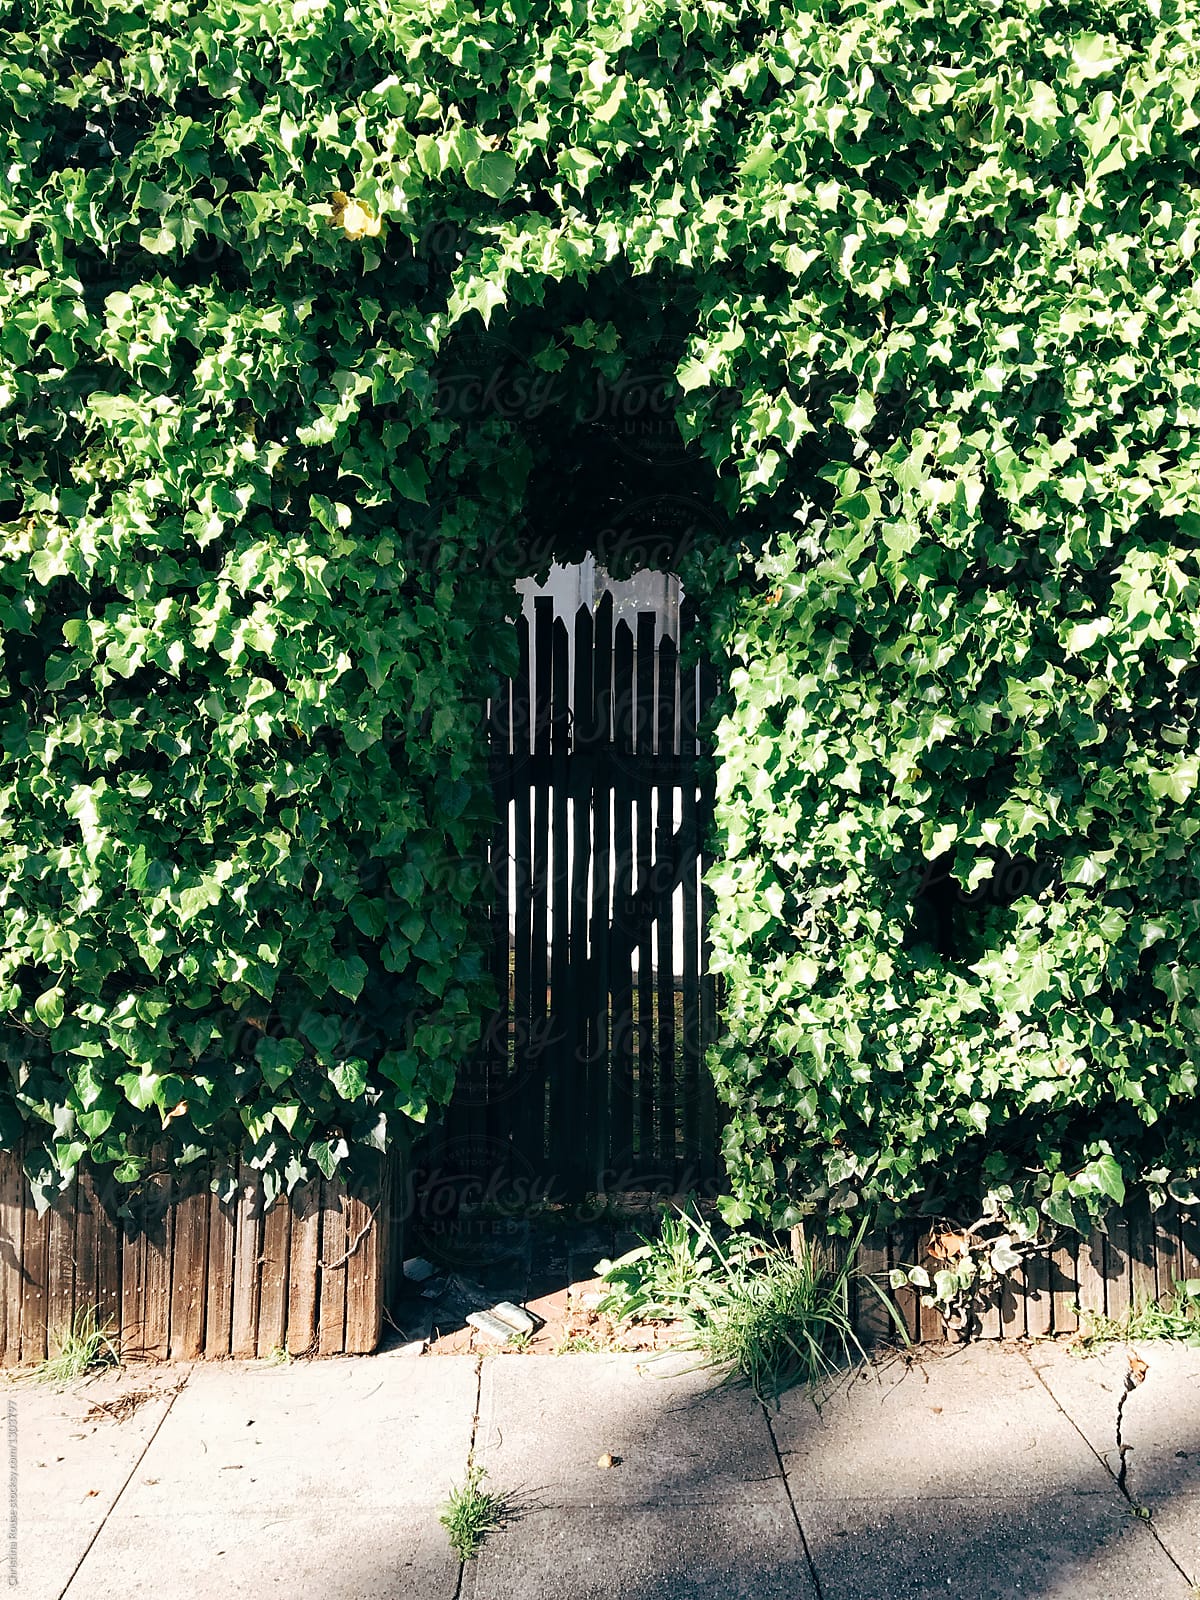 Gate entrance covered by hedge of vines